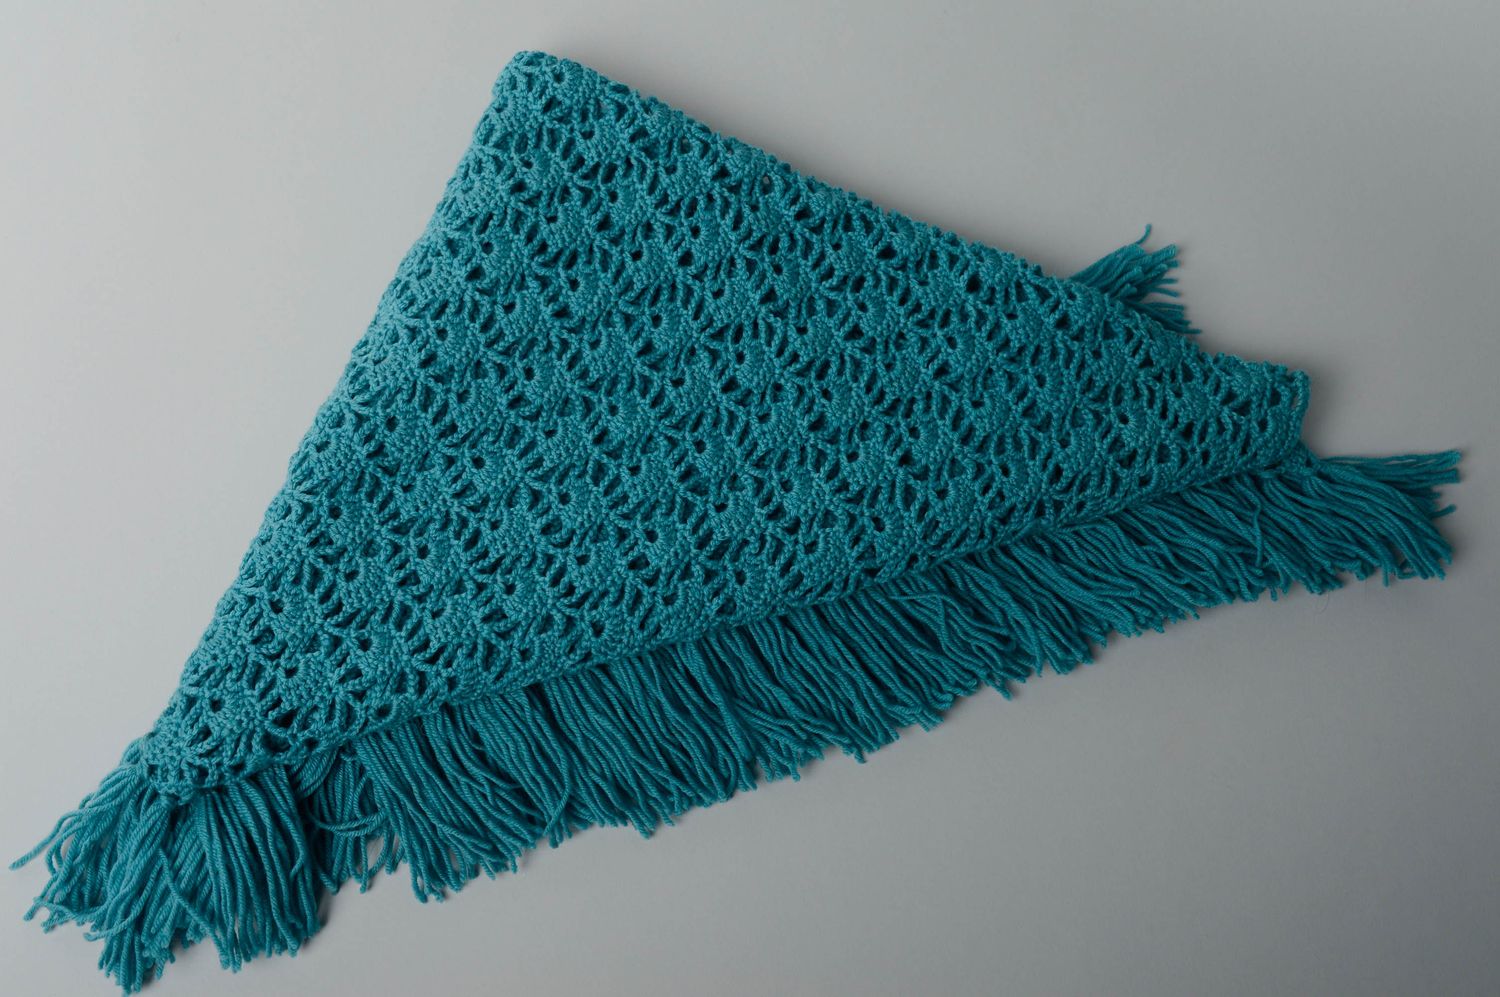 Hand crochet wool shawl of turquoise color photo 1